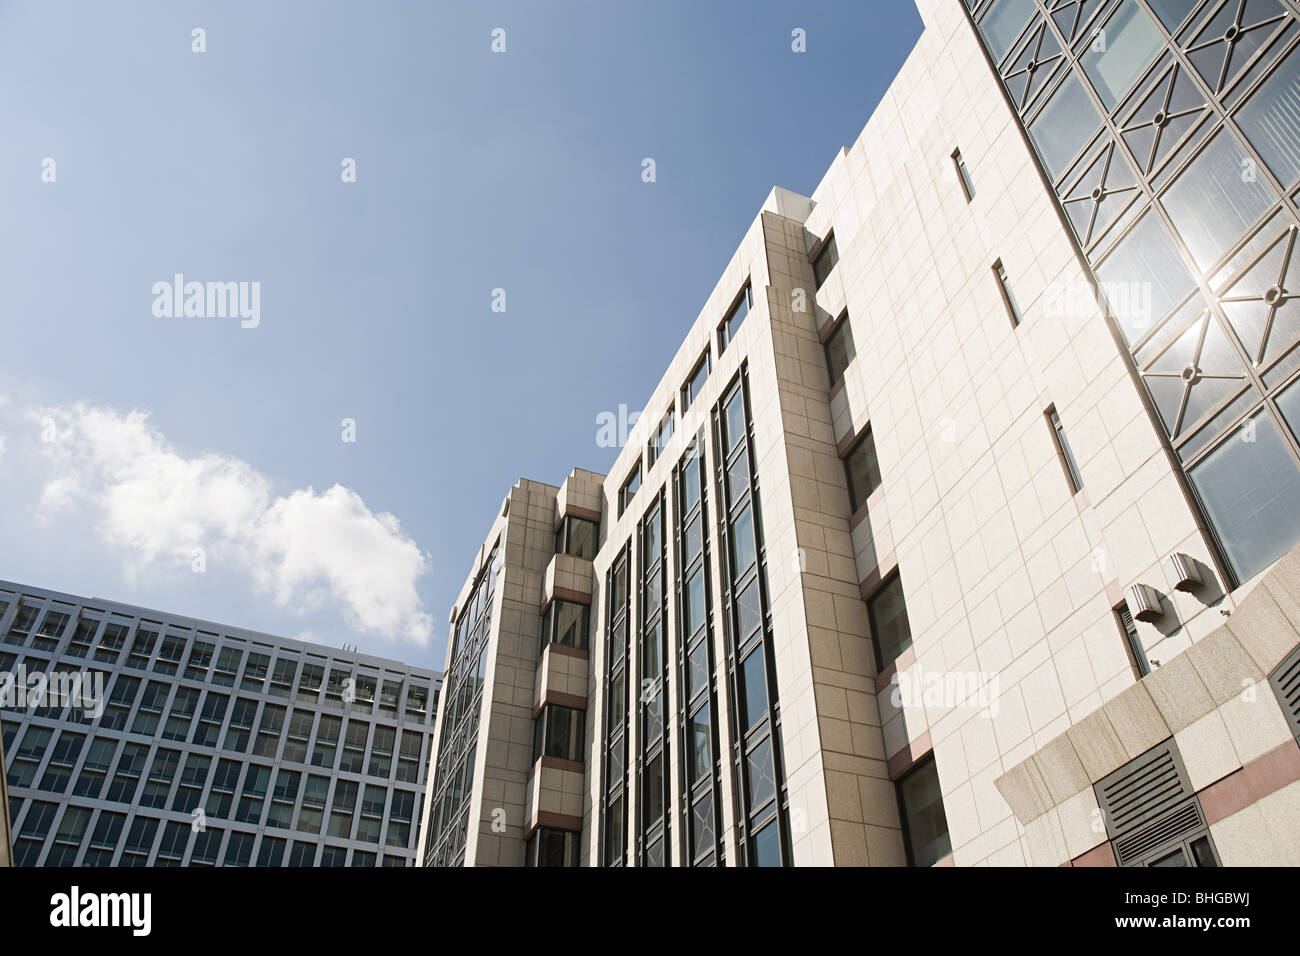 Low angle view of office buildings Stock Photo